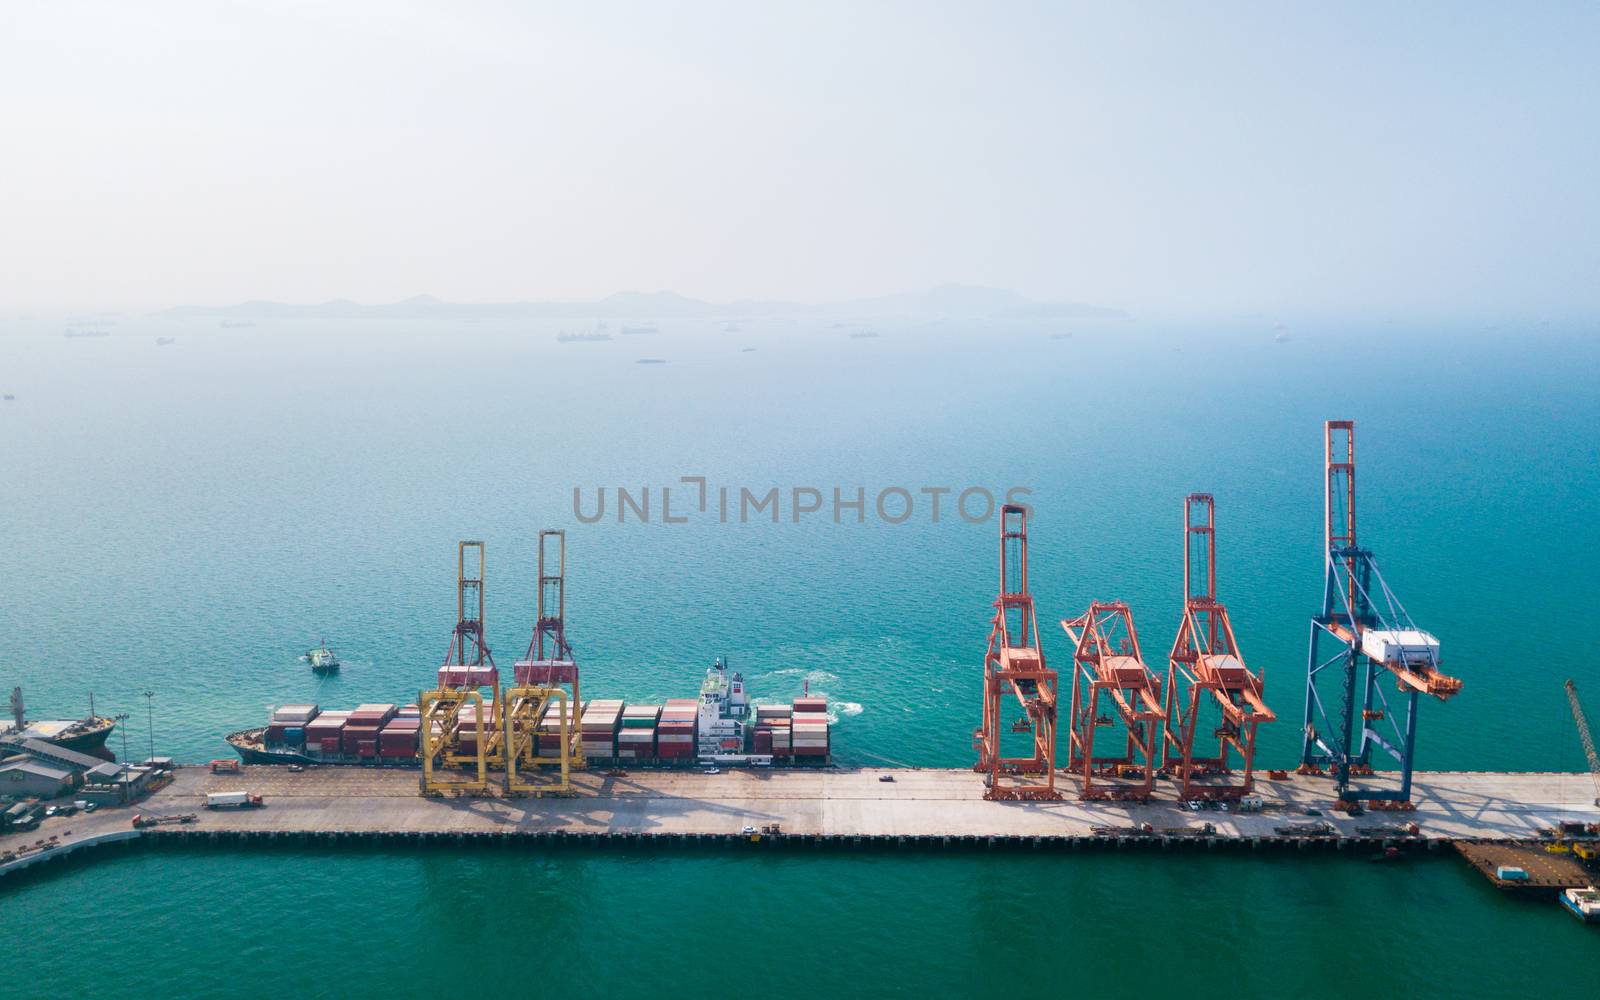 Aerial view of container ship in import - export business indust by antpkr